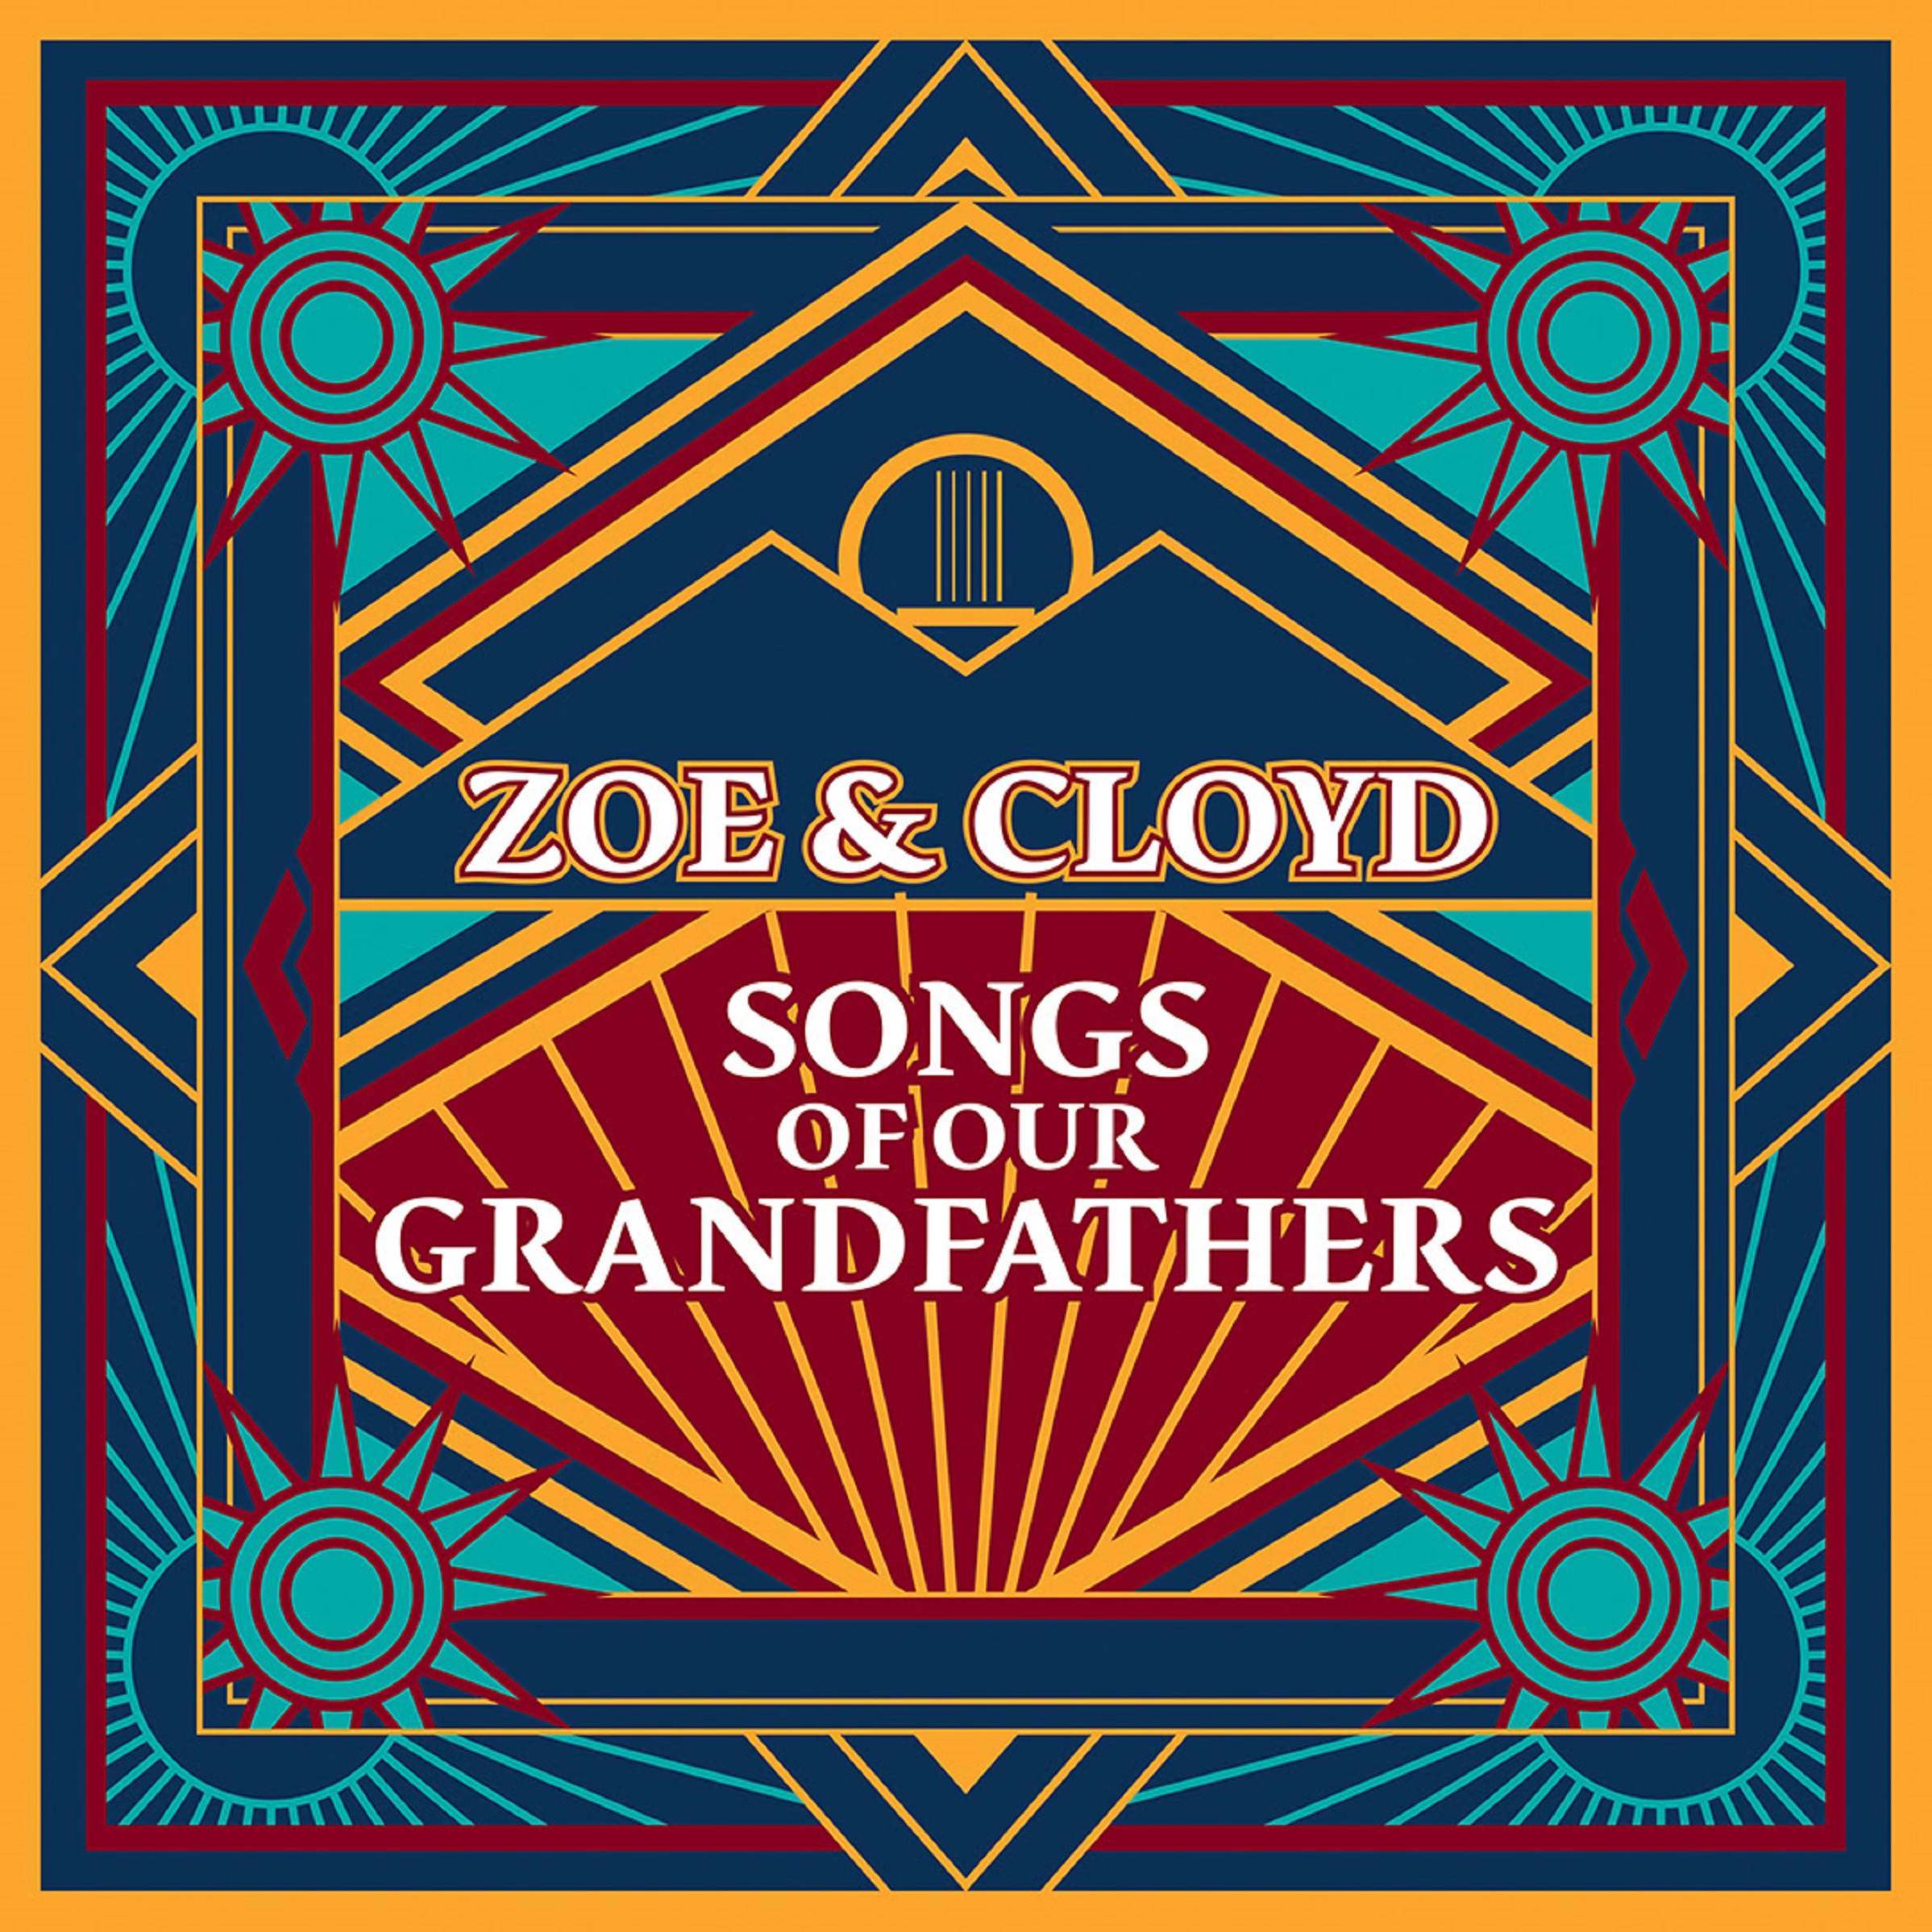 Zoe & Cloyd's new album explores their families' musical roots